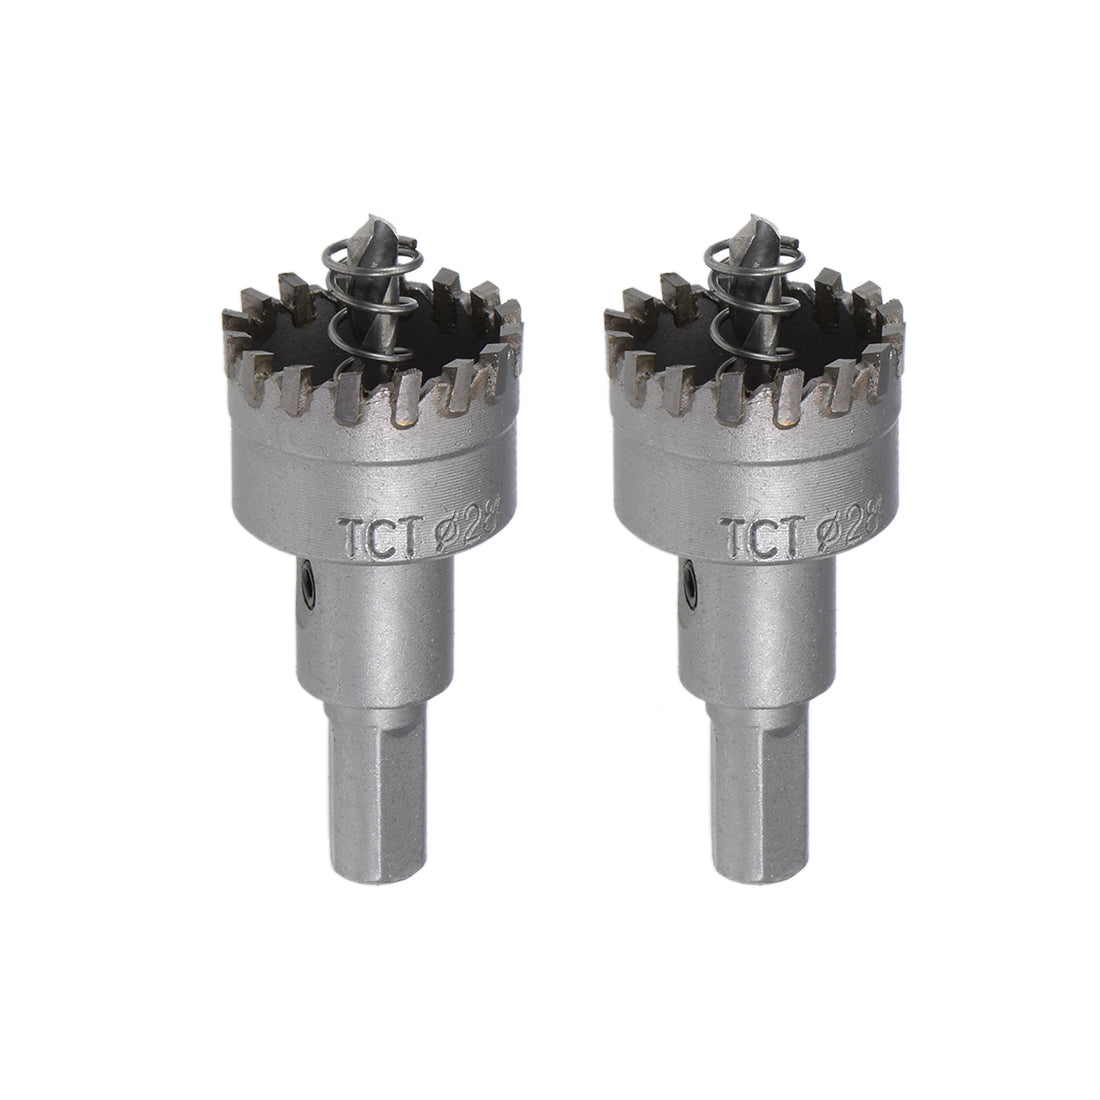 uxcell Uxcell Hole Saw Cutter High Density Carbide Teeth for Stainless Steel 2 Pcs